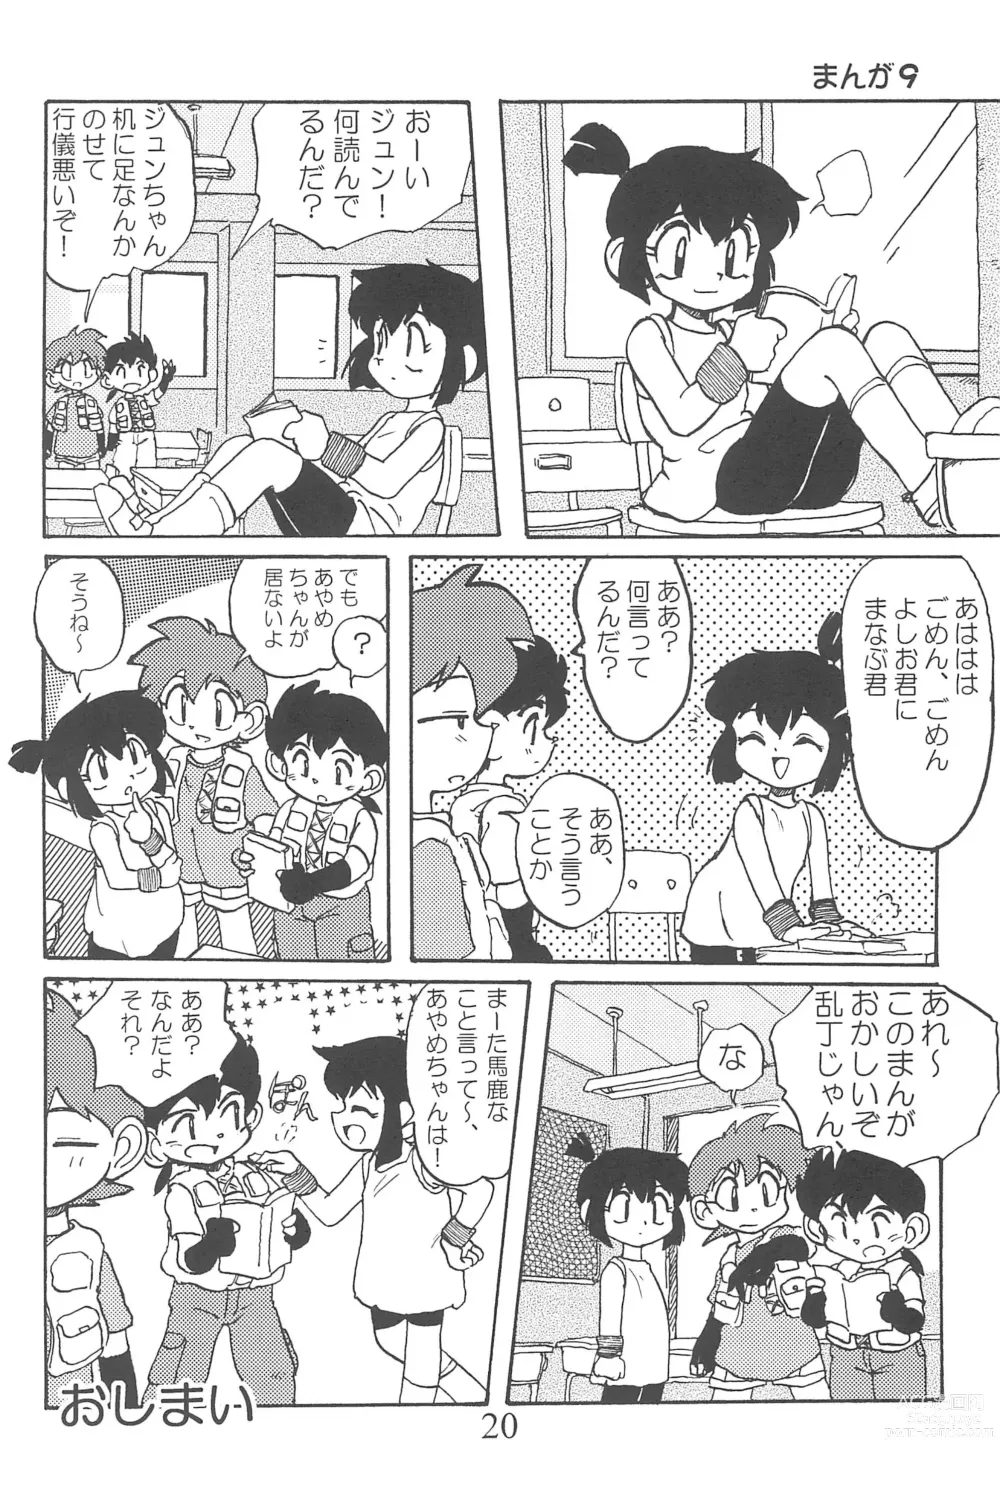 Page 20 of doujinshi Amuse-gueule